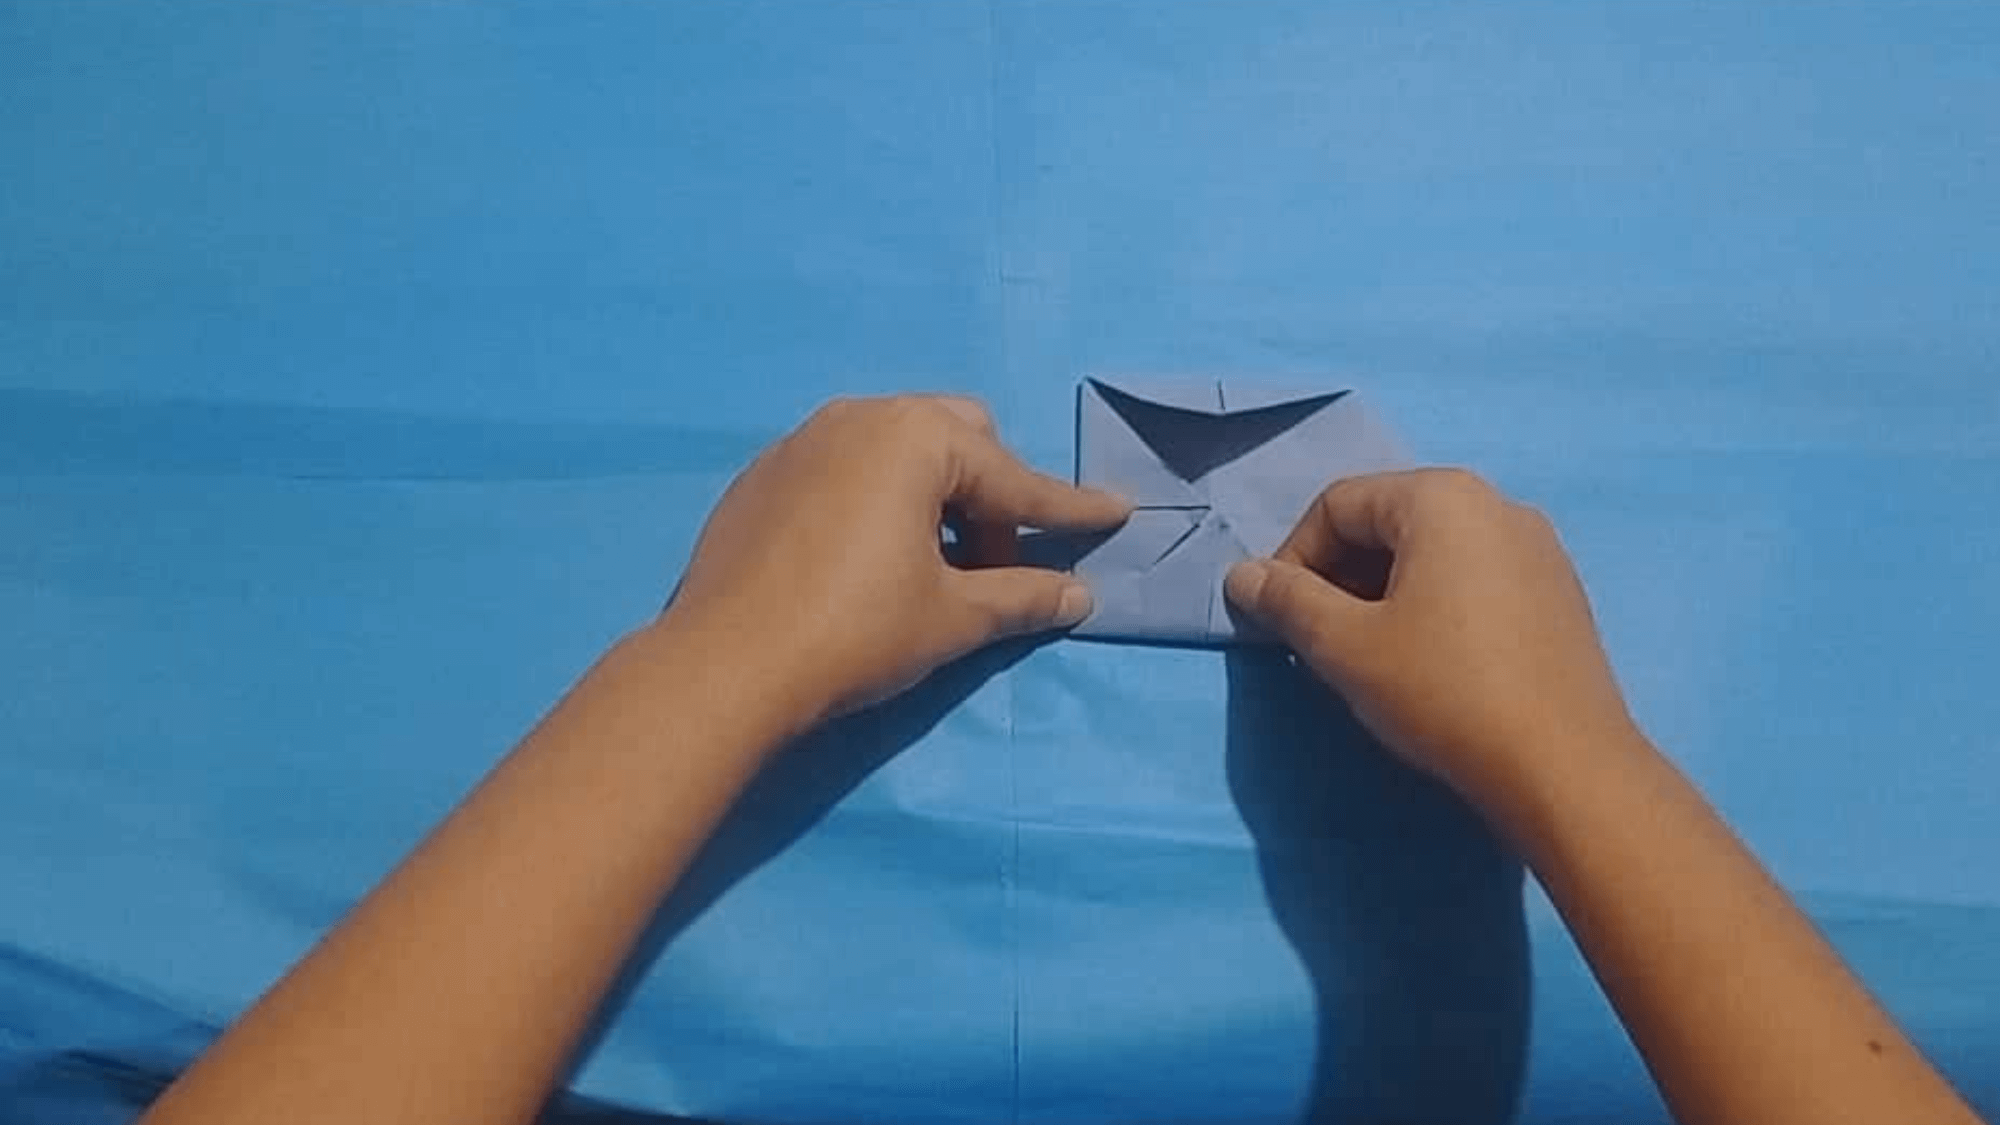 origami lotus flower instructions step 7.2